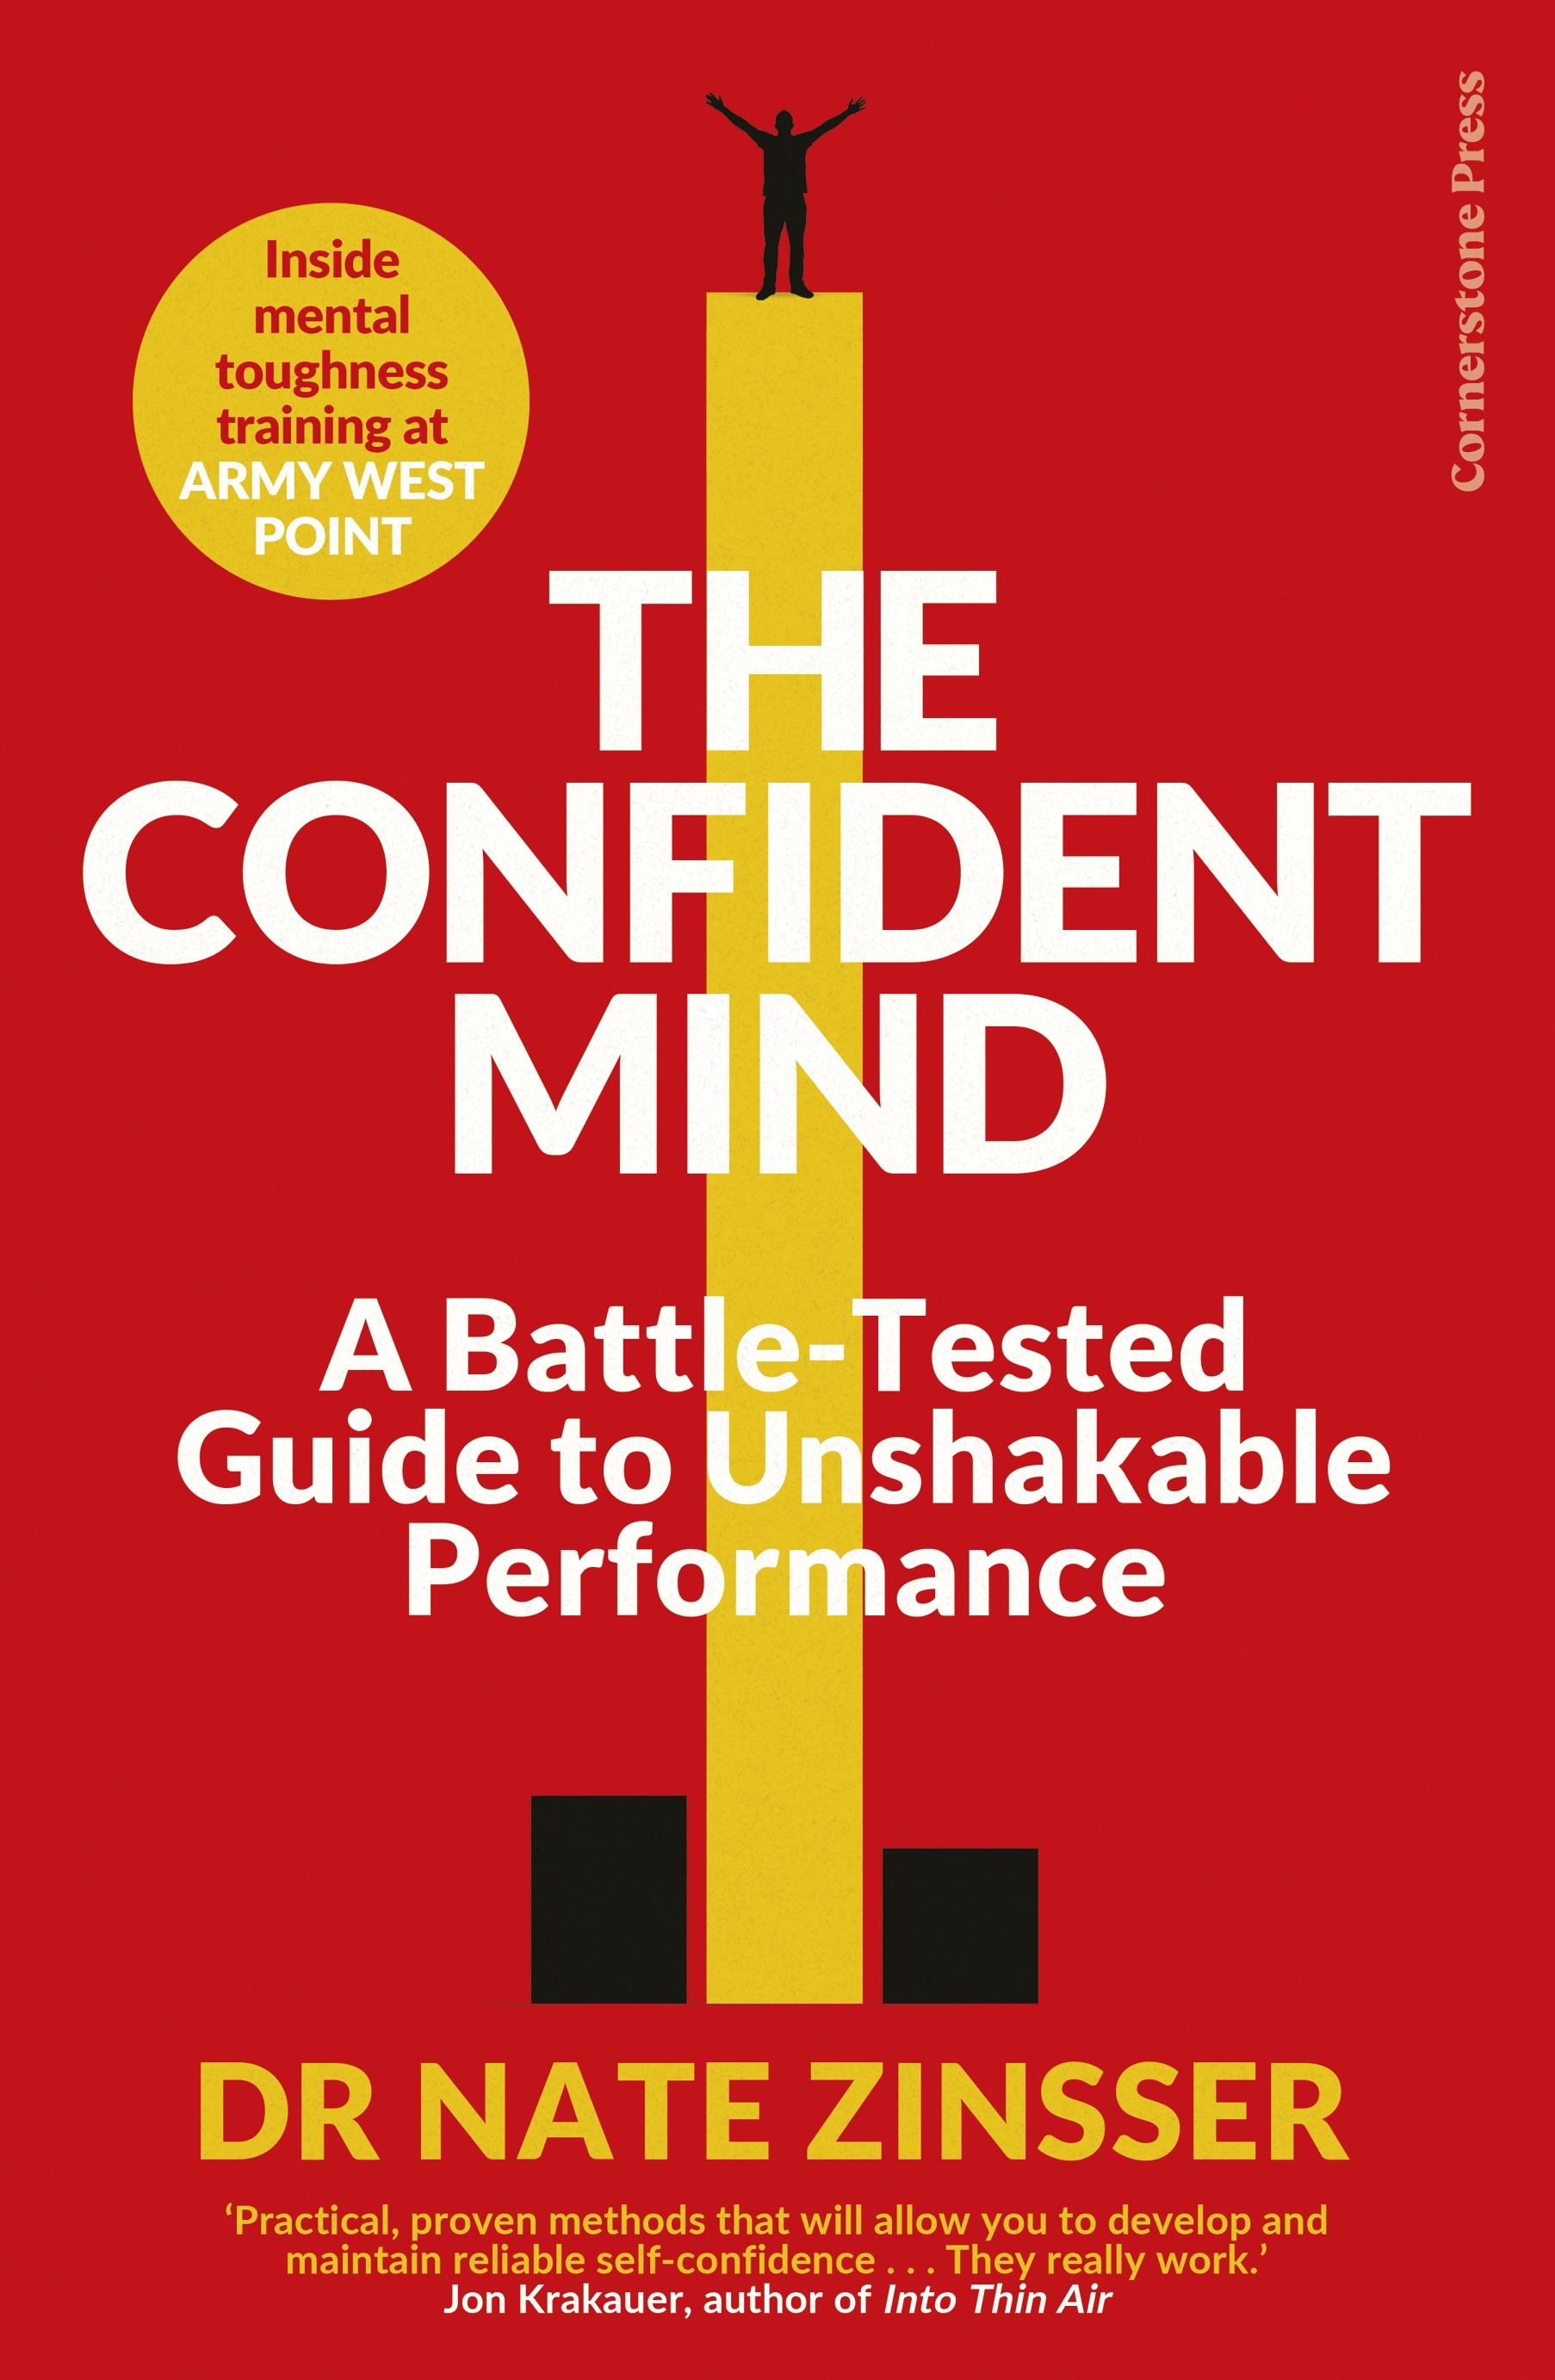 Book “The Confident Mind” by Nathaniel Zinsser — January 27, 2022